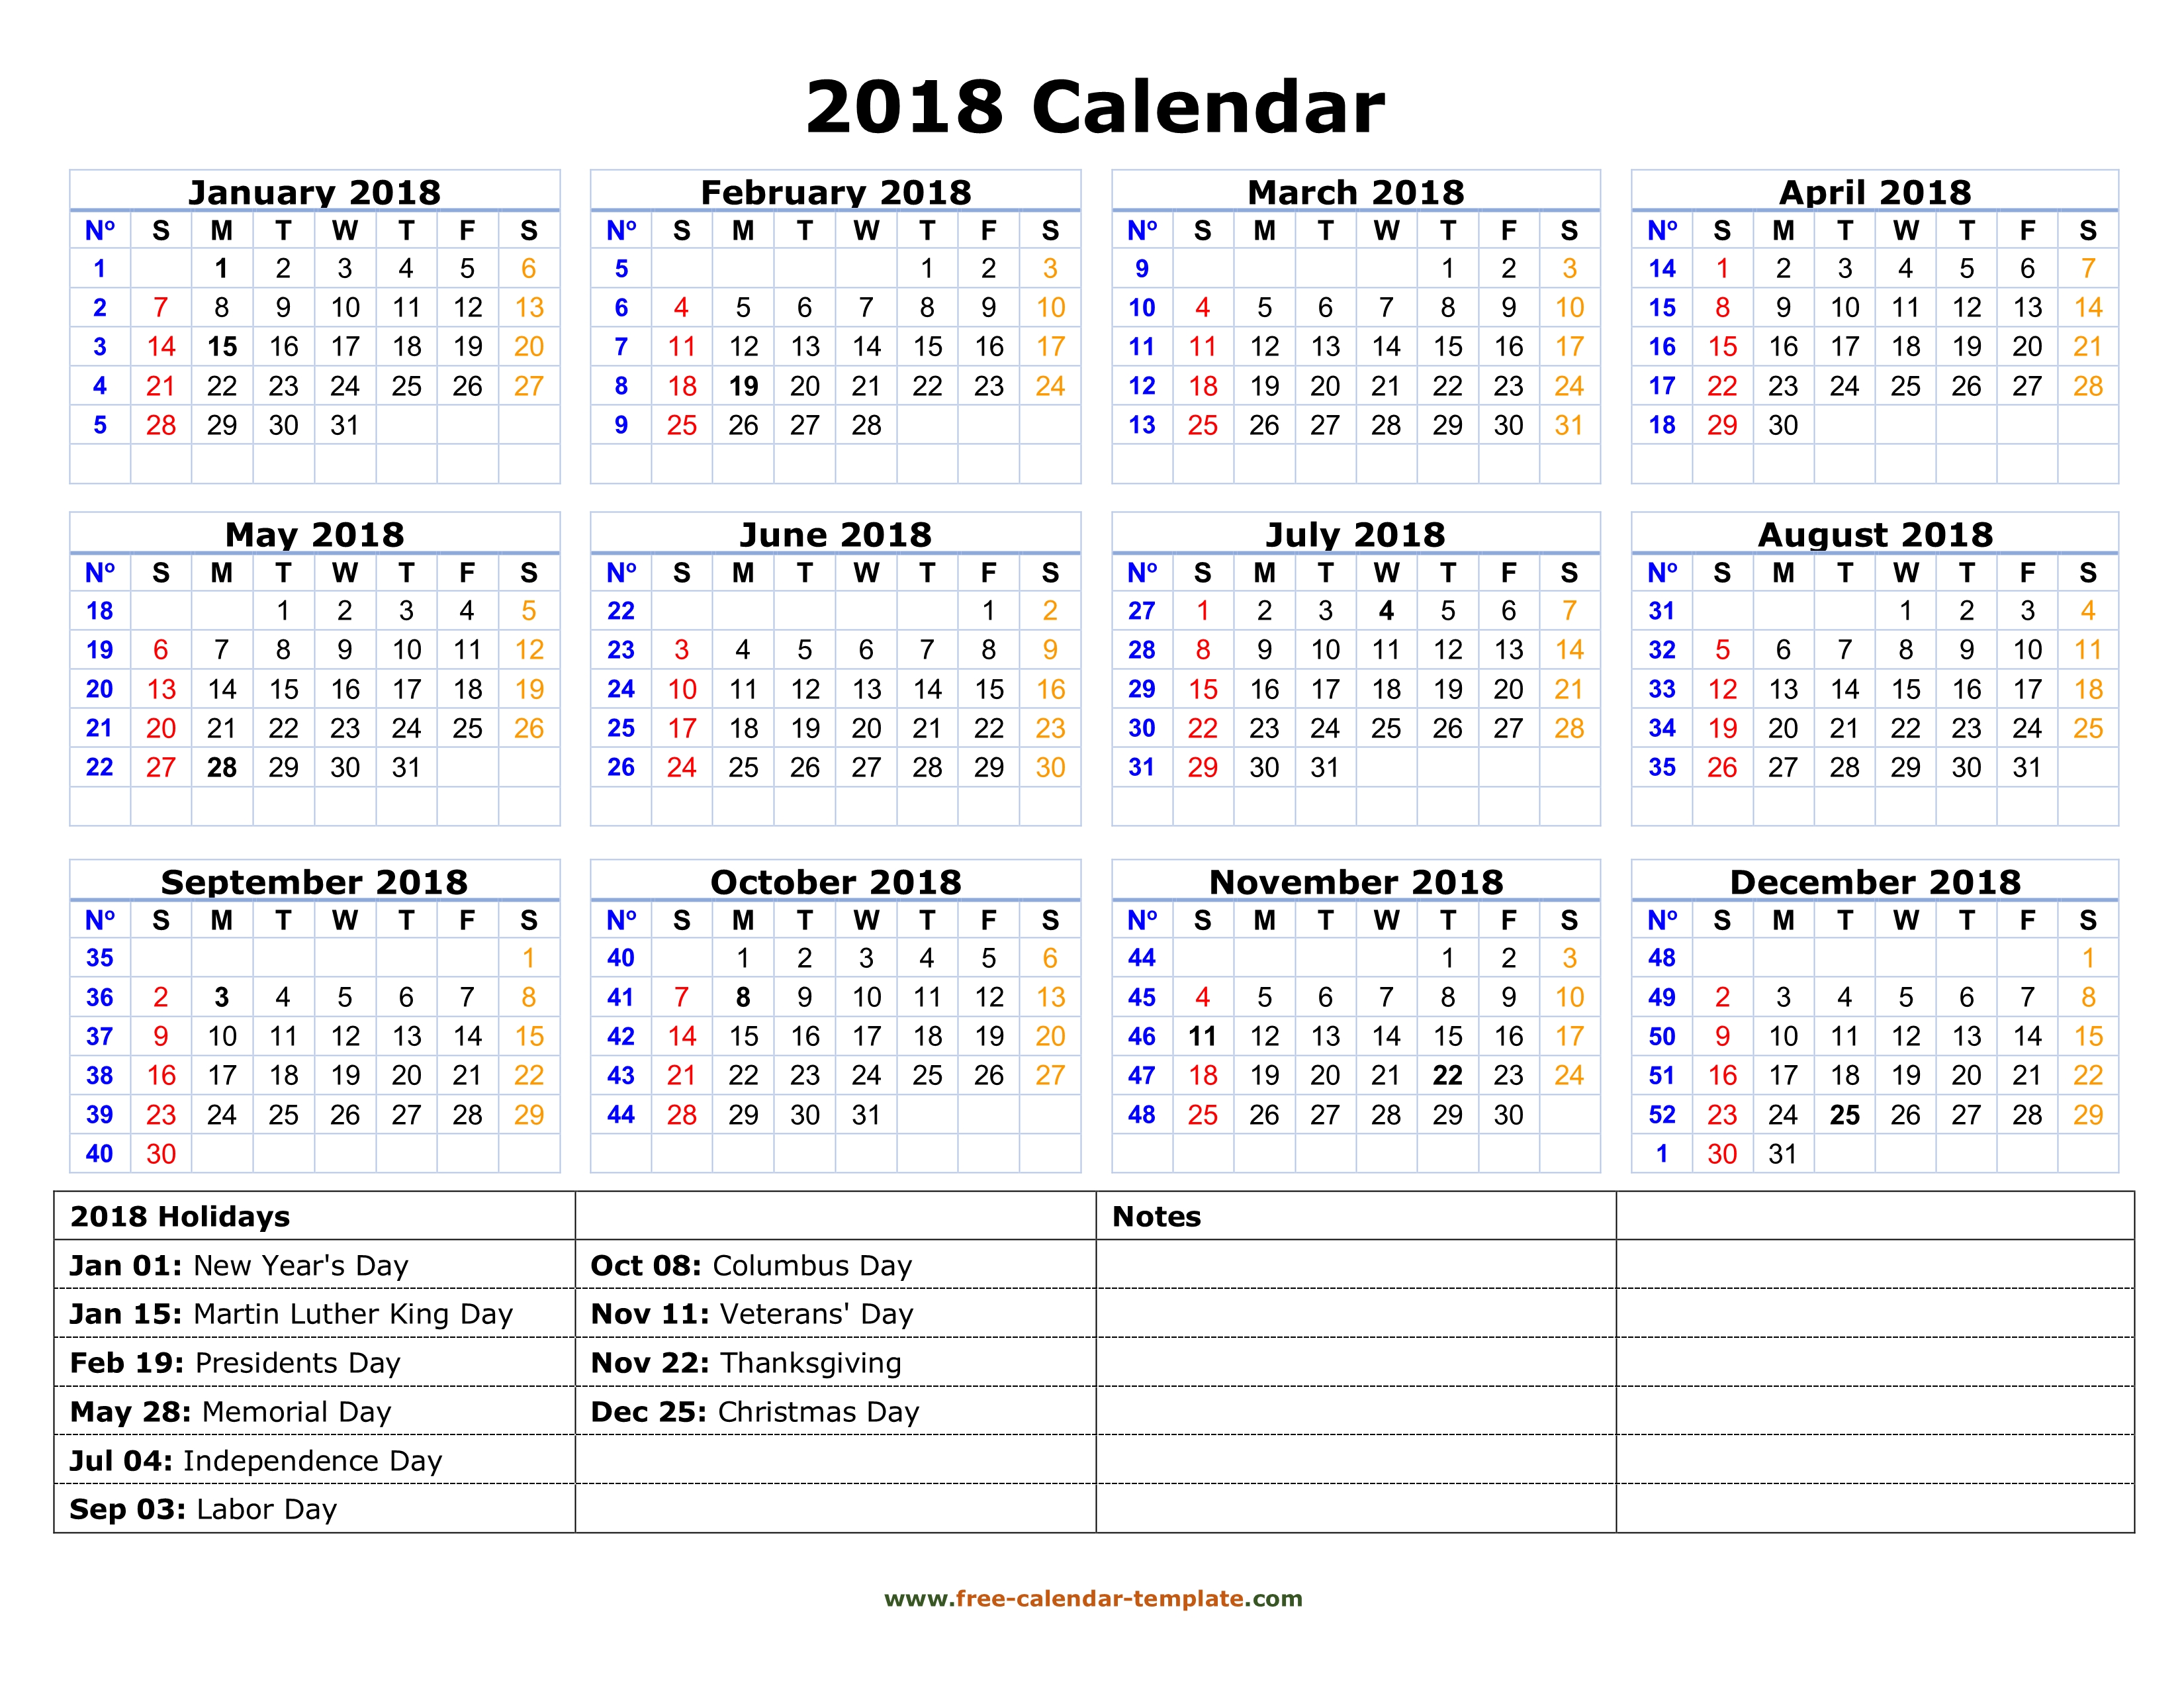 yearly-calendar-2018-free-download-and-print